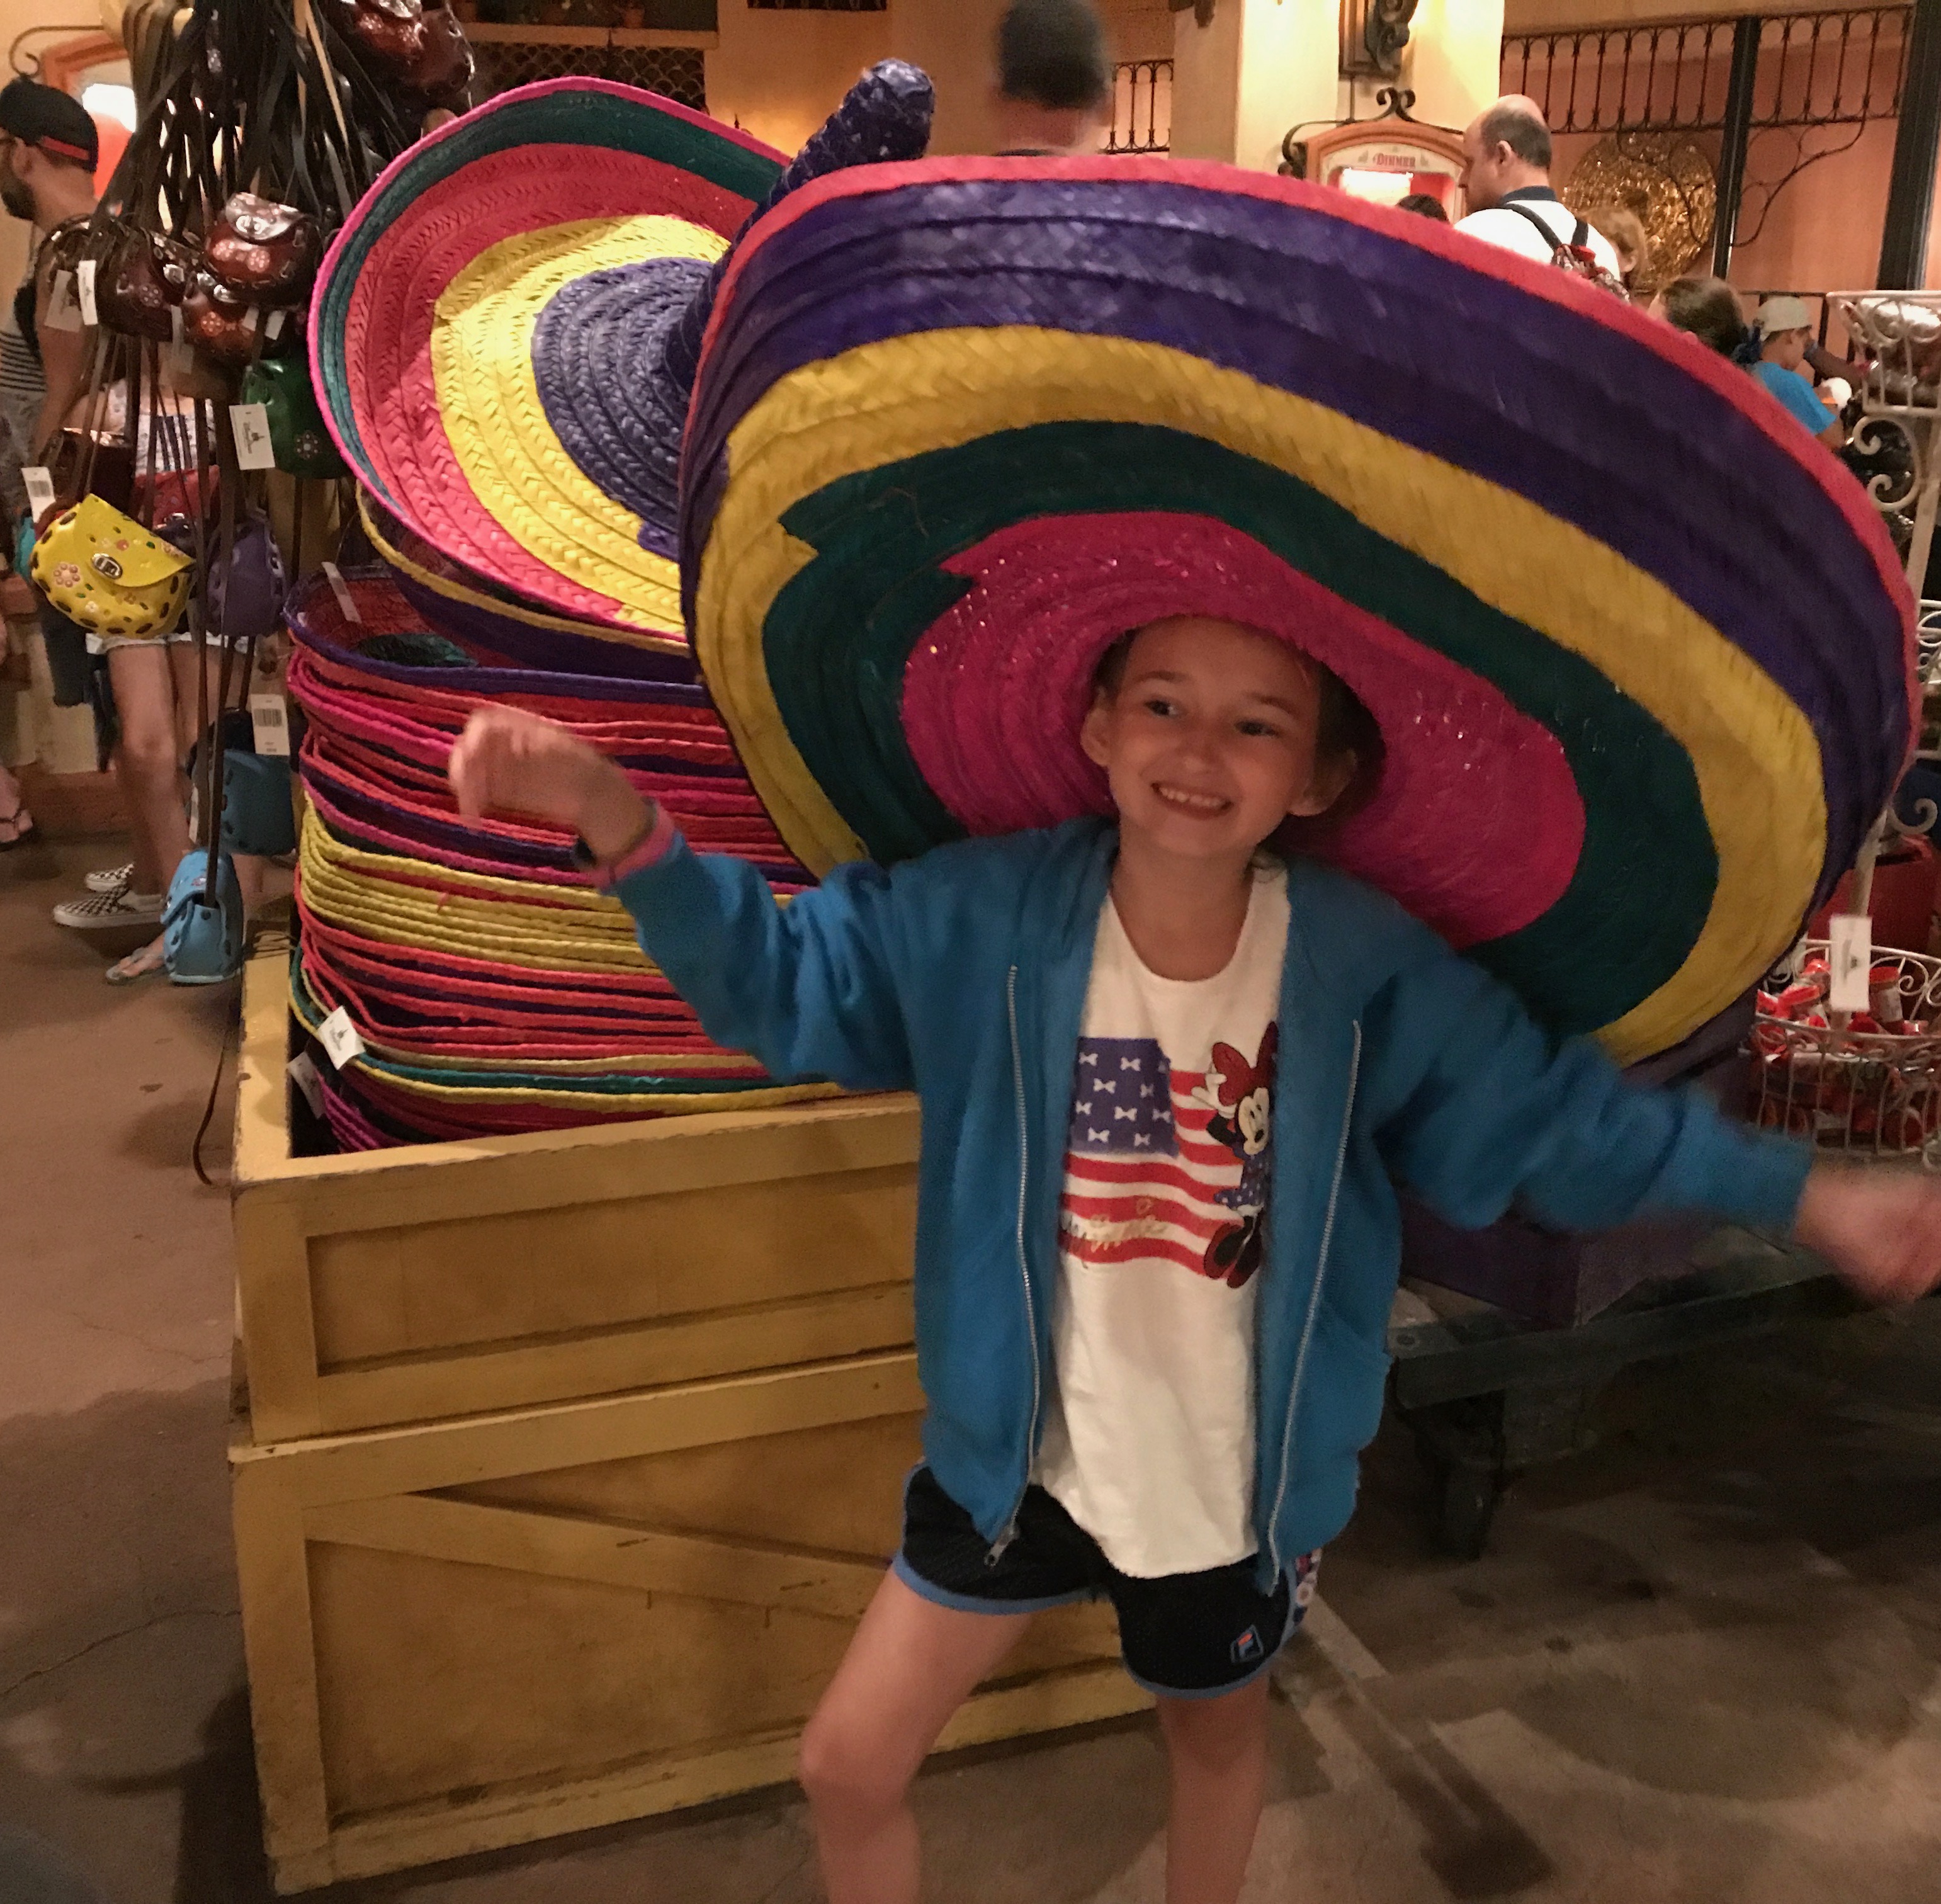 Shopping at Epcot in The Mexican Market wearing a Sombrero